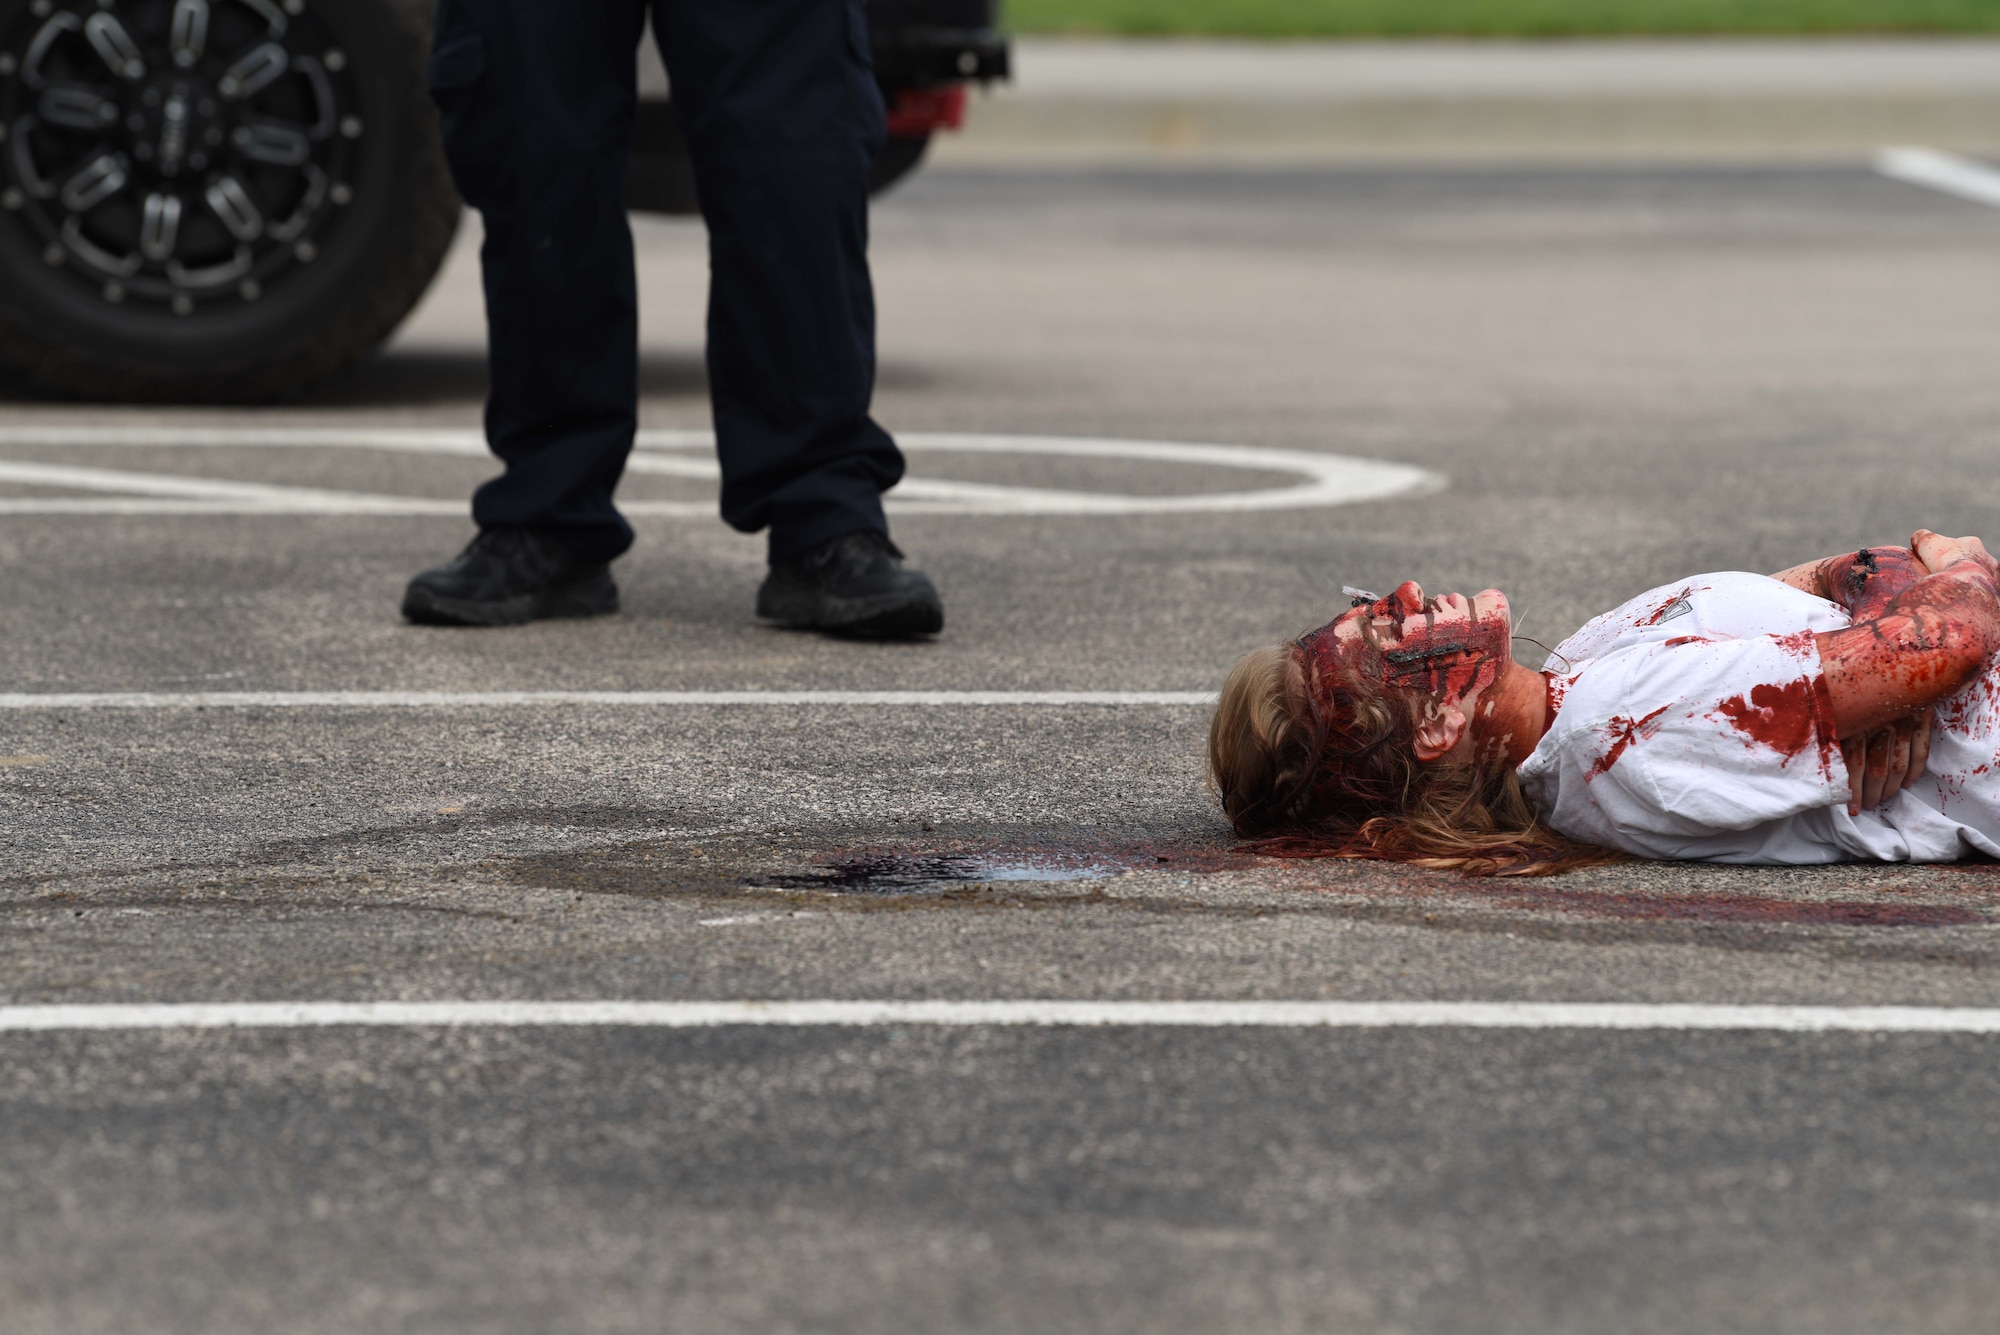 A student performer pretends to be injured after a simulated vehicle accident at Douglas High School’s Freshman Impact in Box Elder S.D., May 9, 2018. This event teaches young adults about the dangers of driving under the influence and distracted driving so they can make better decisions behind the wheel. (U.S.  Air Force photo by Airman 1st Class Thomas Karol)